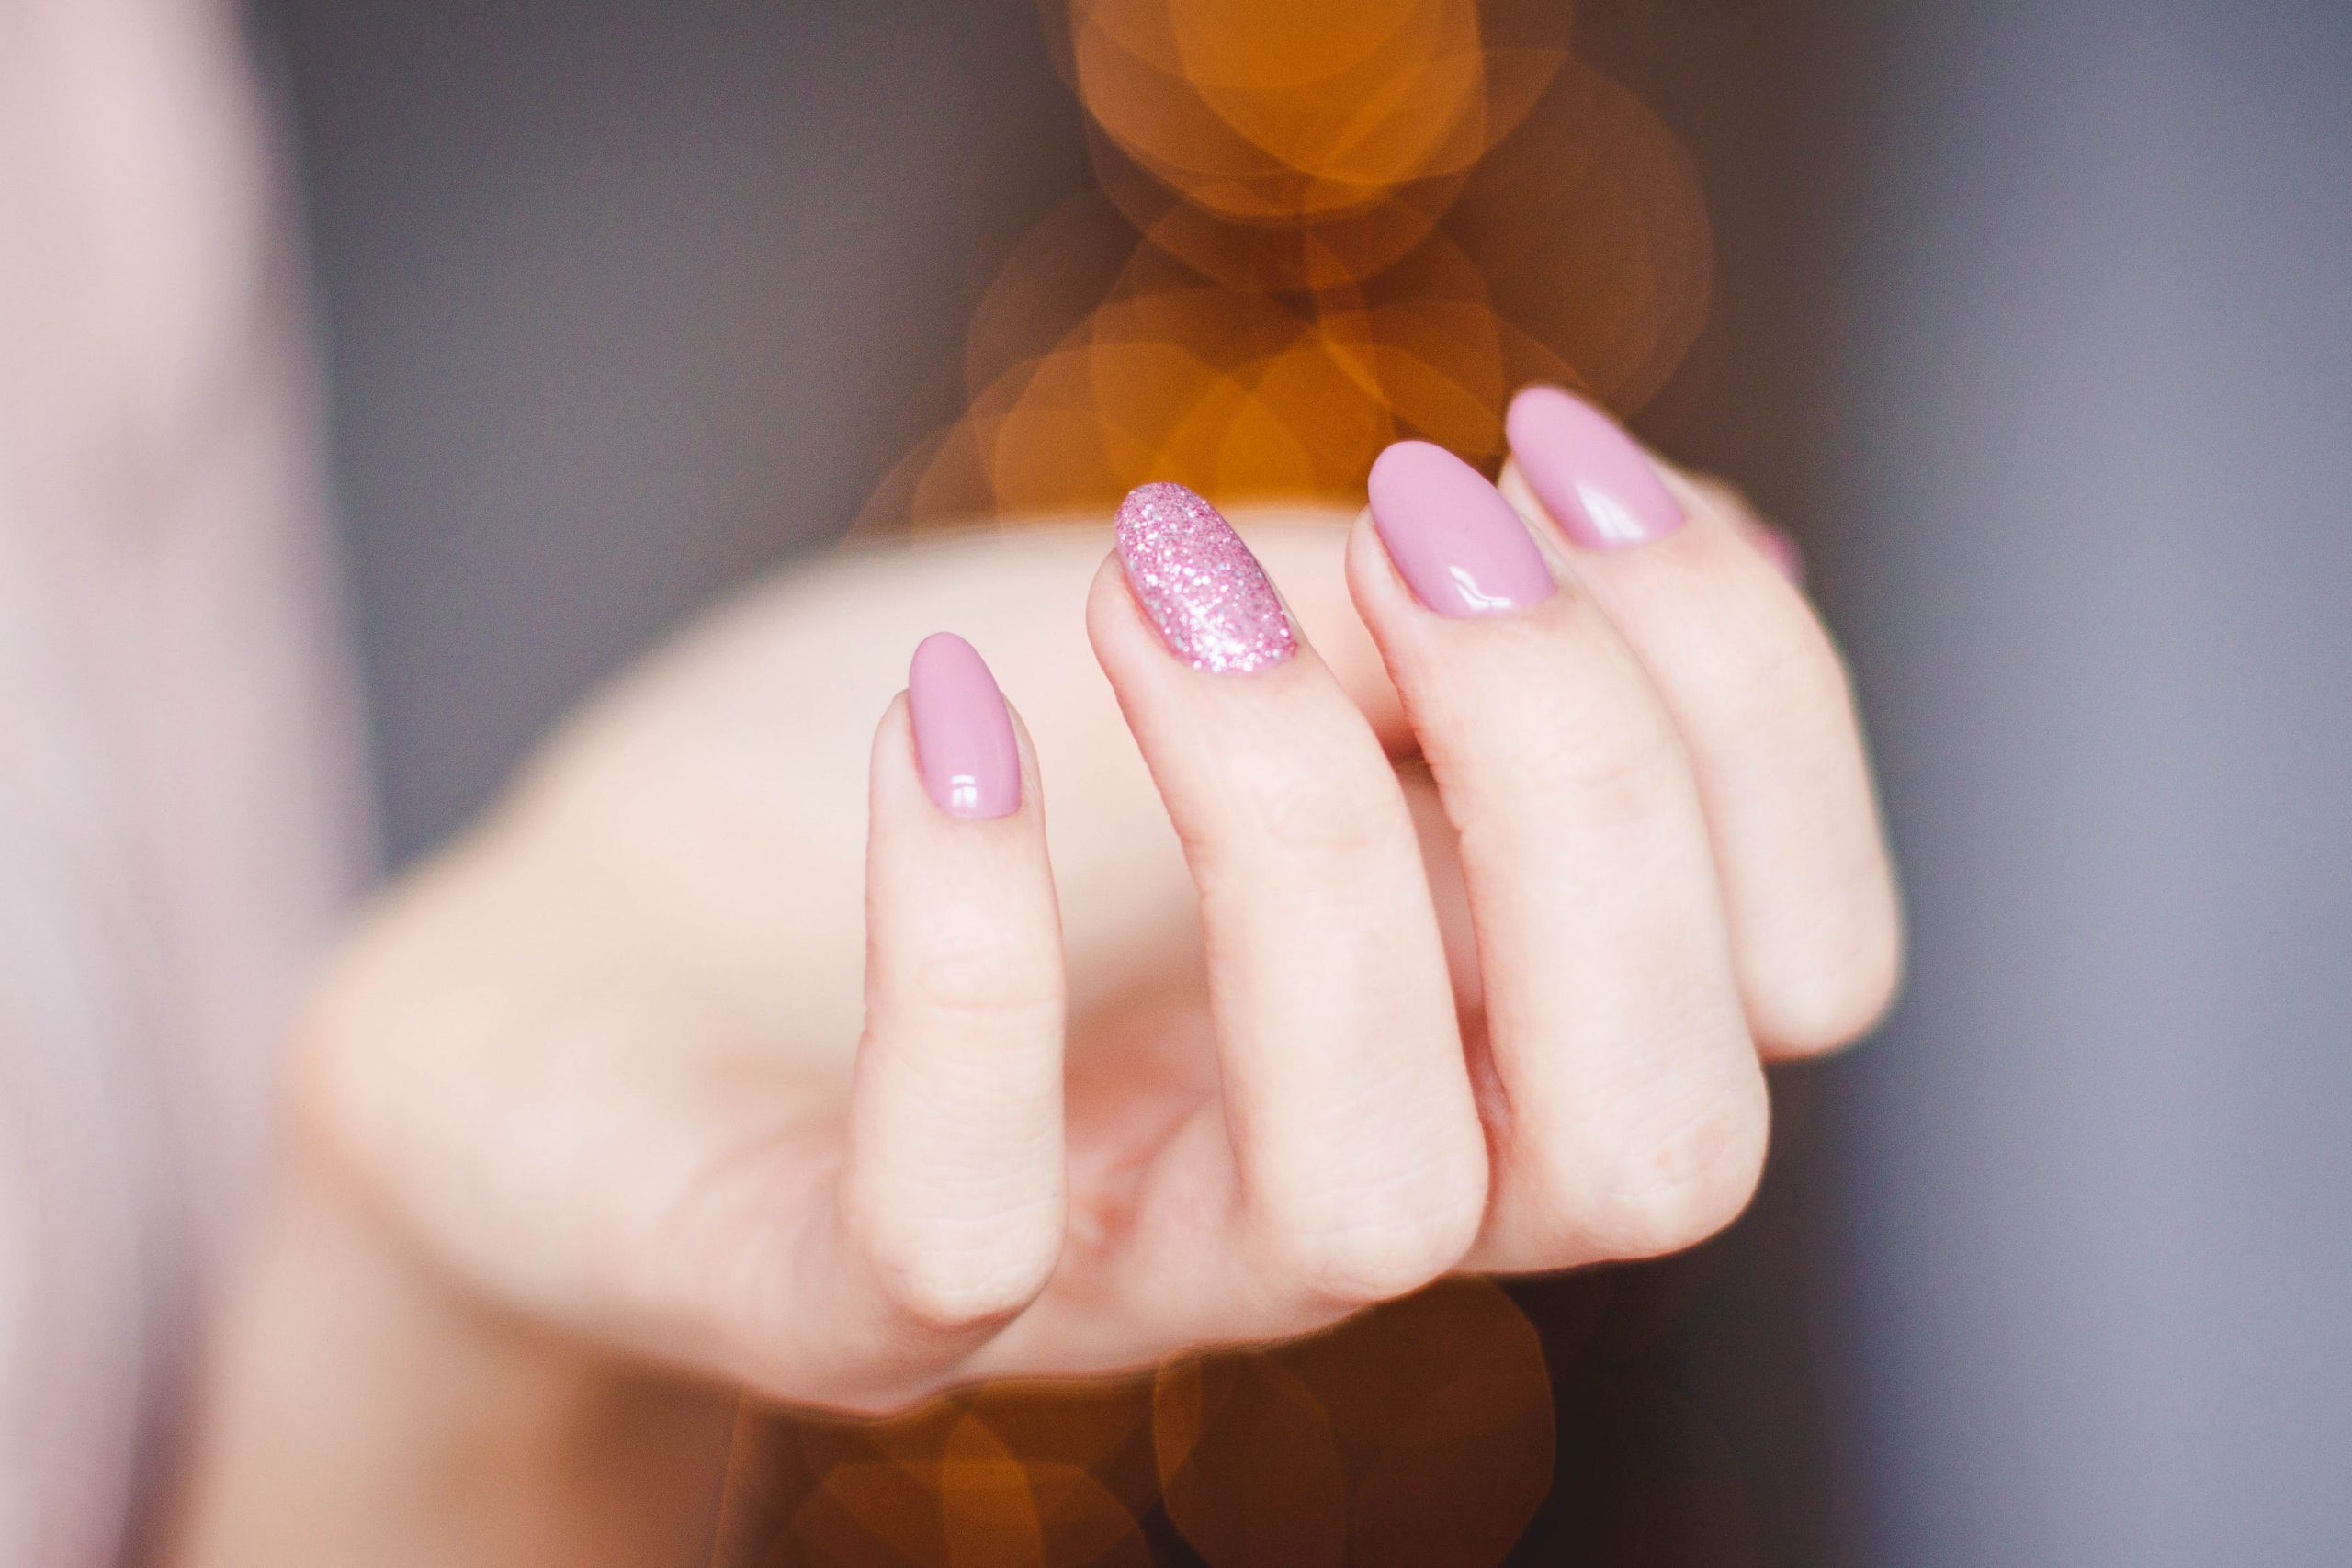 12 best products for presson nails according to experts